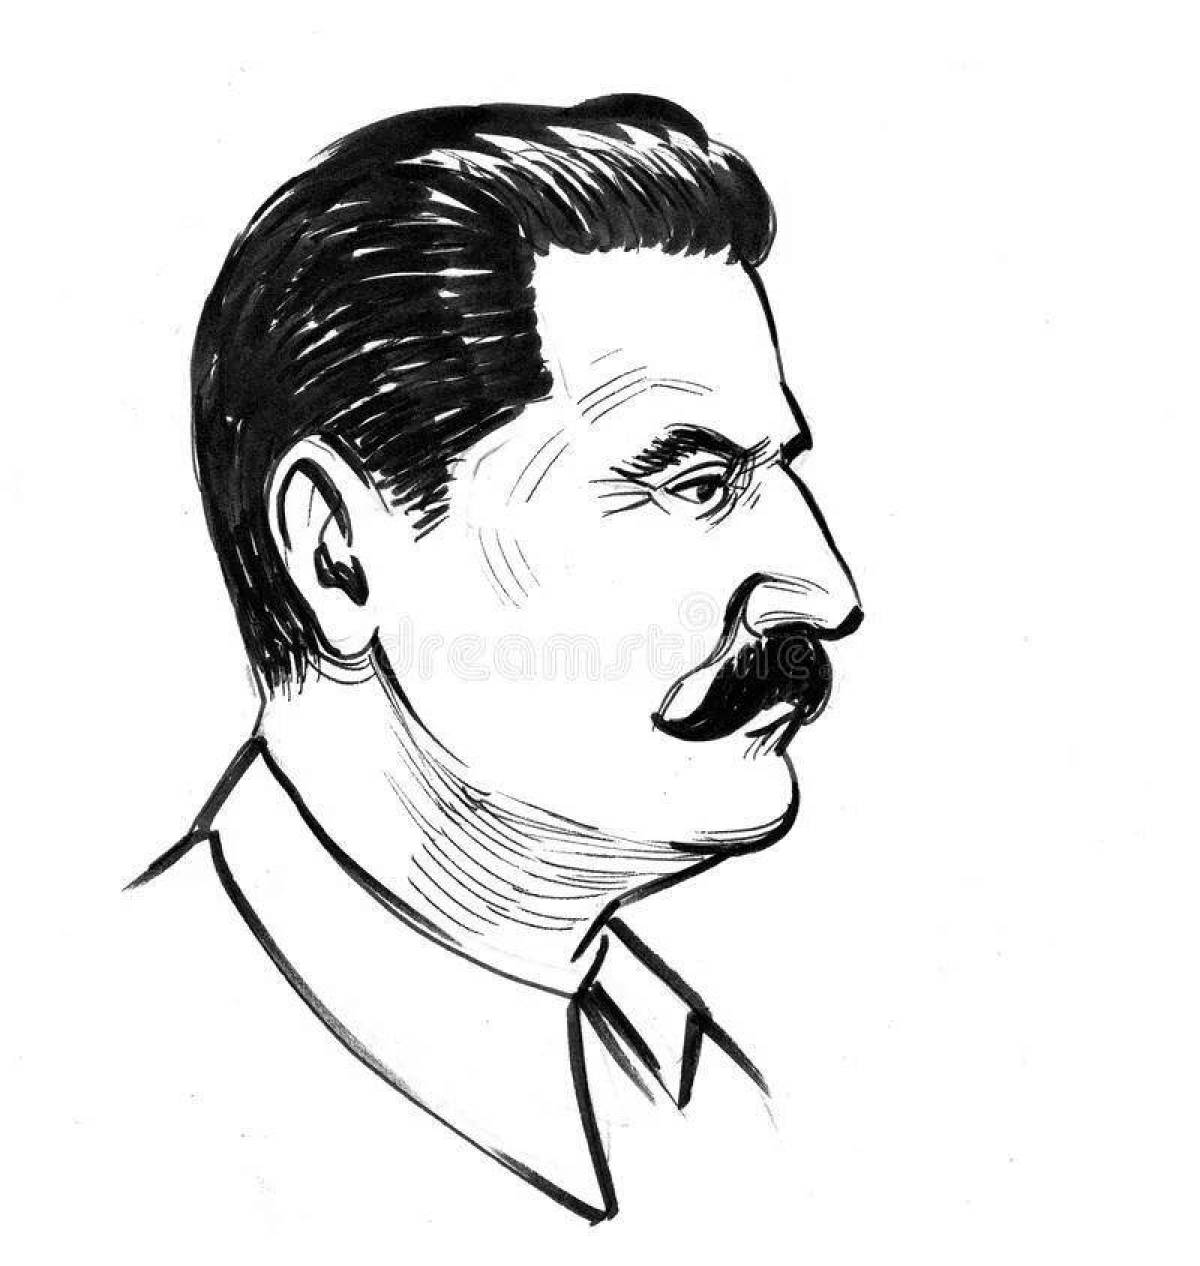 Stalin's mysterious coloring